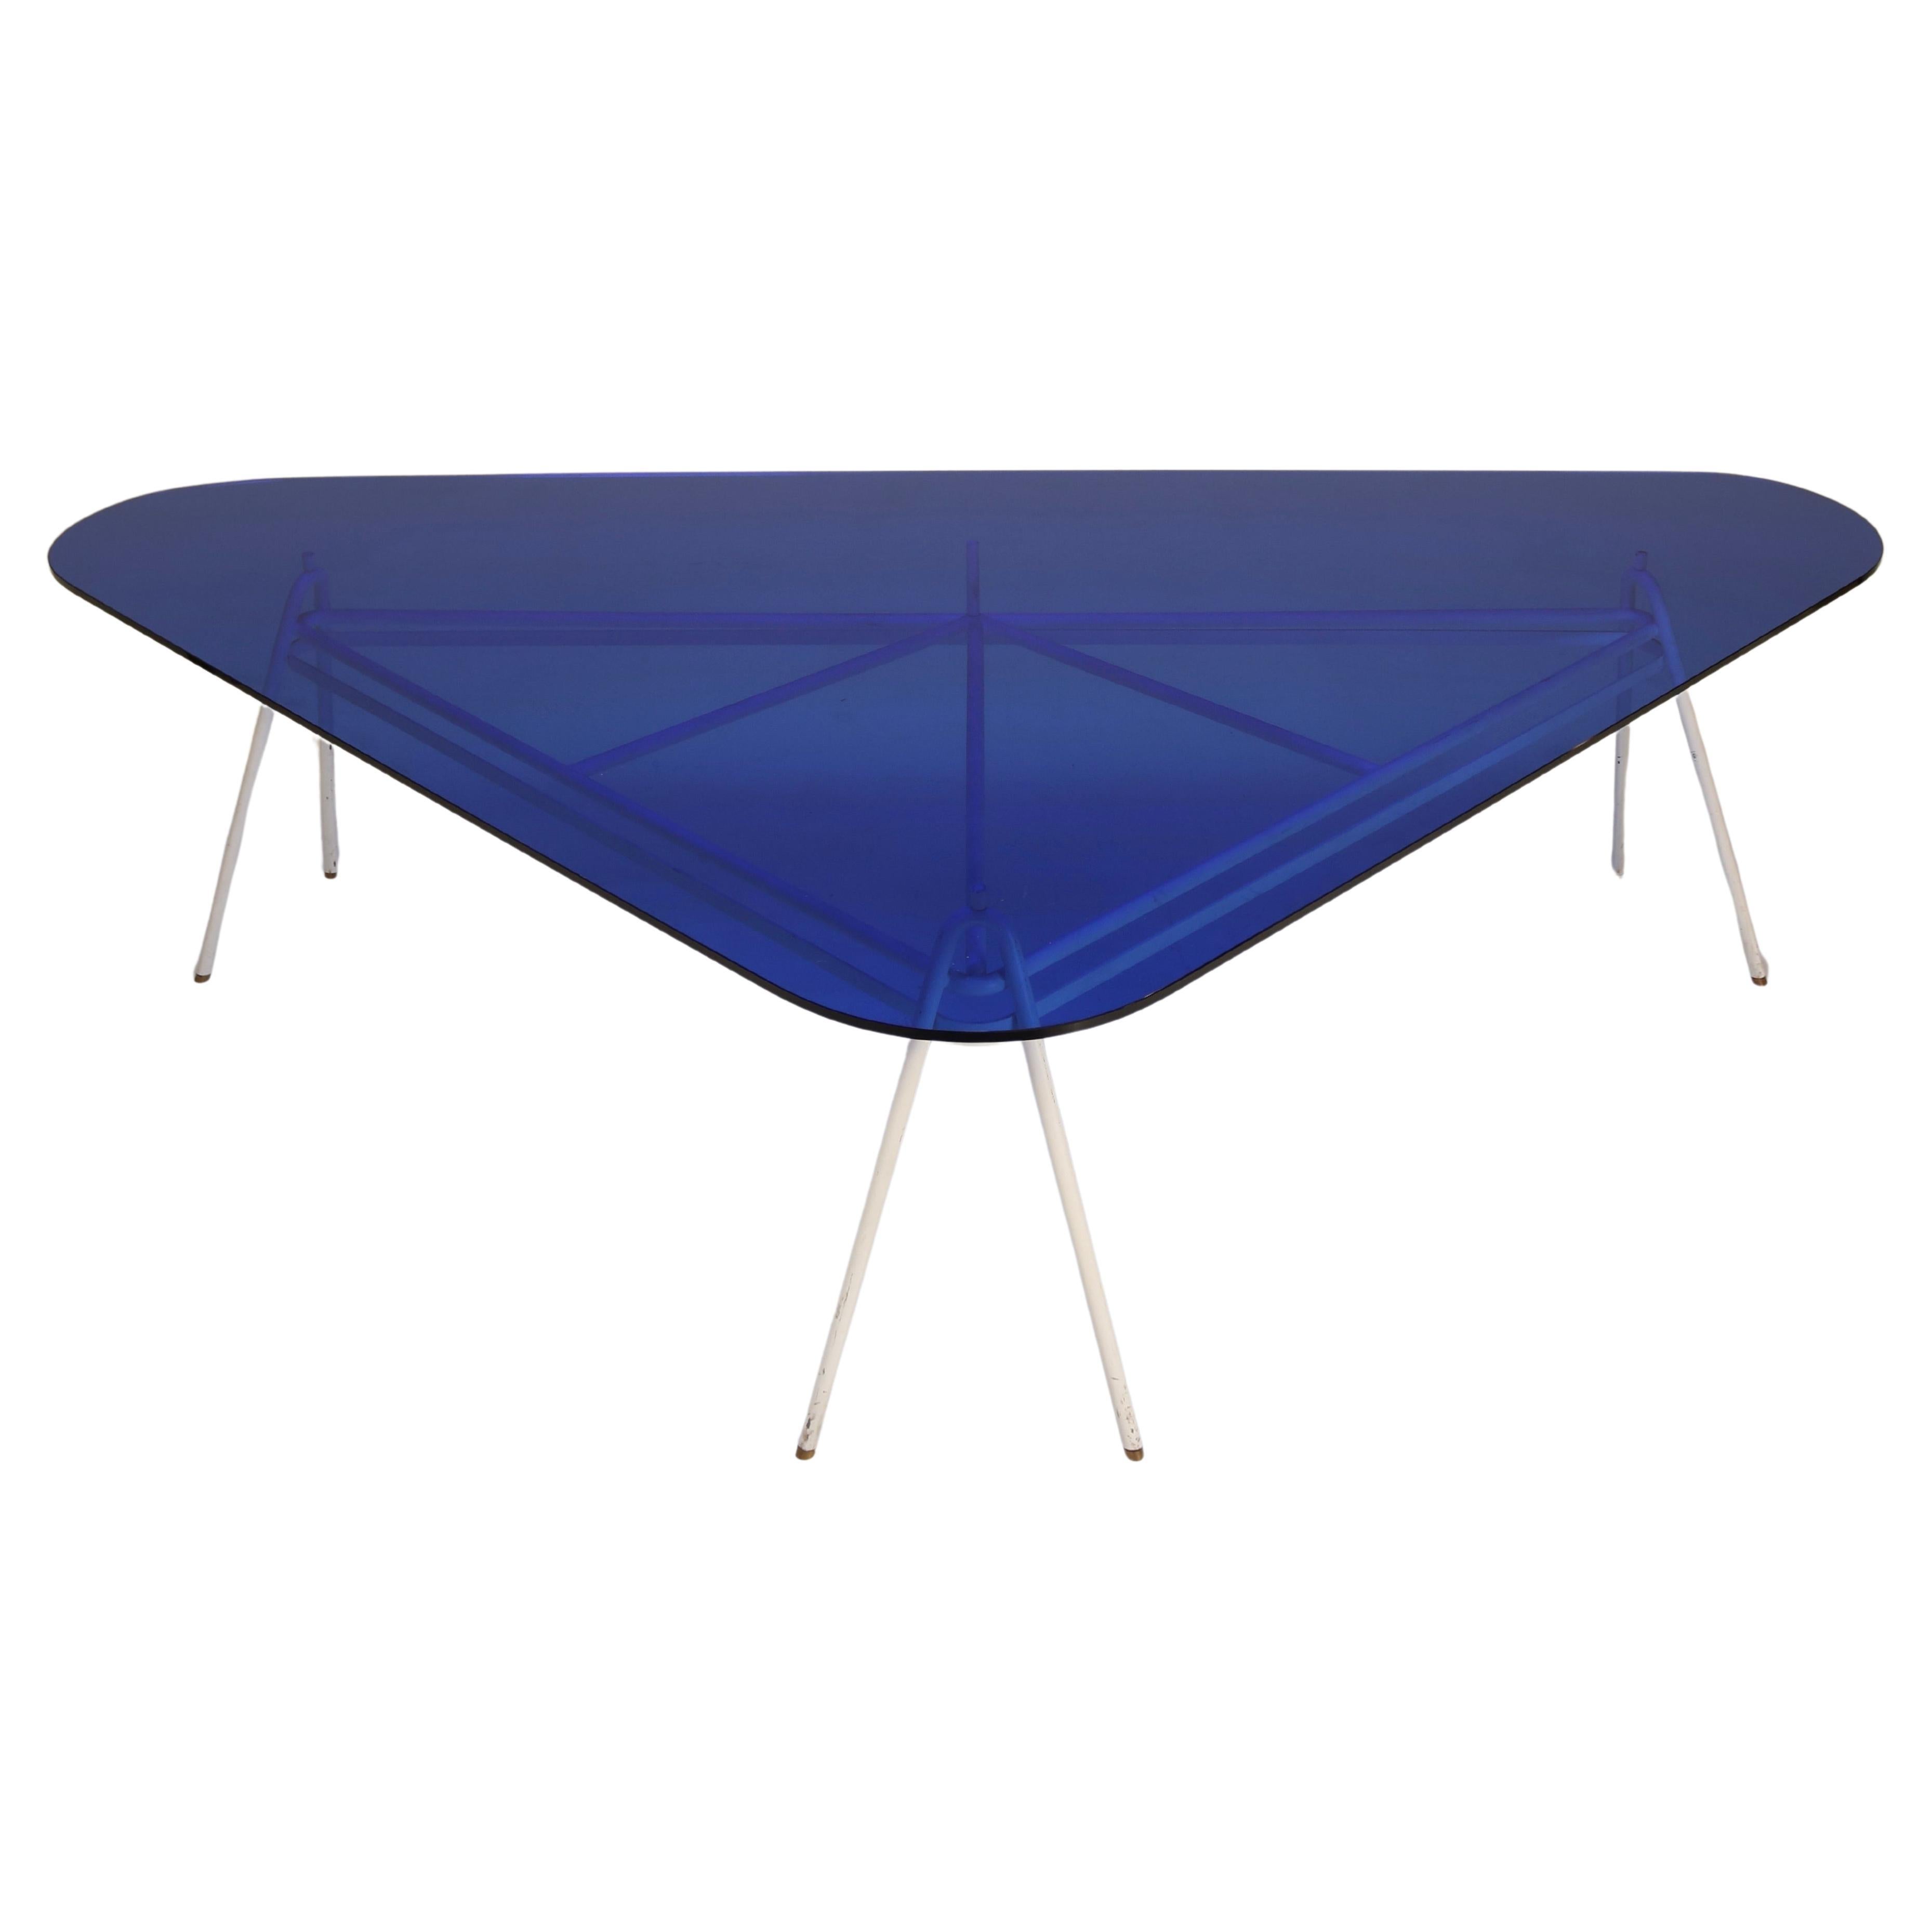 Rarely do meeting tables manage to be both functional and so aesthetically appealing as this example, made by Guido Buratti in the 1980s and preserved by the original ownership to this day. The essential lines of the lacquered tubular metal supports